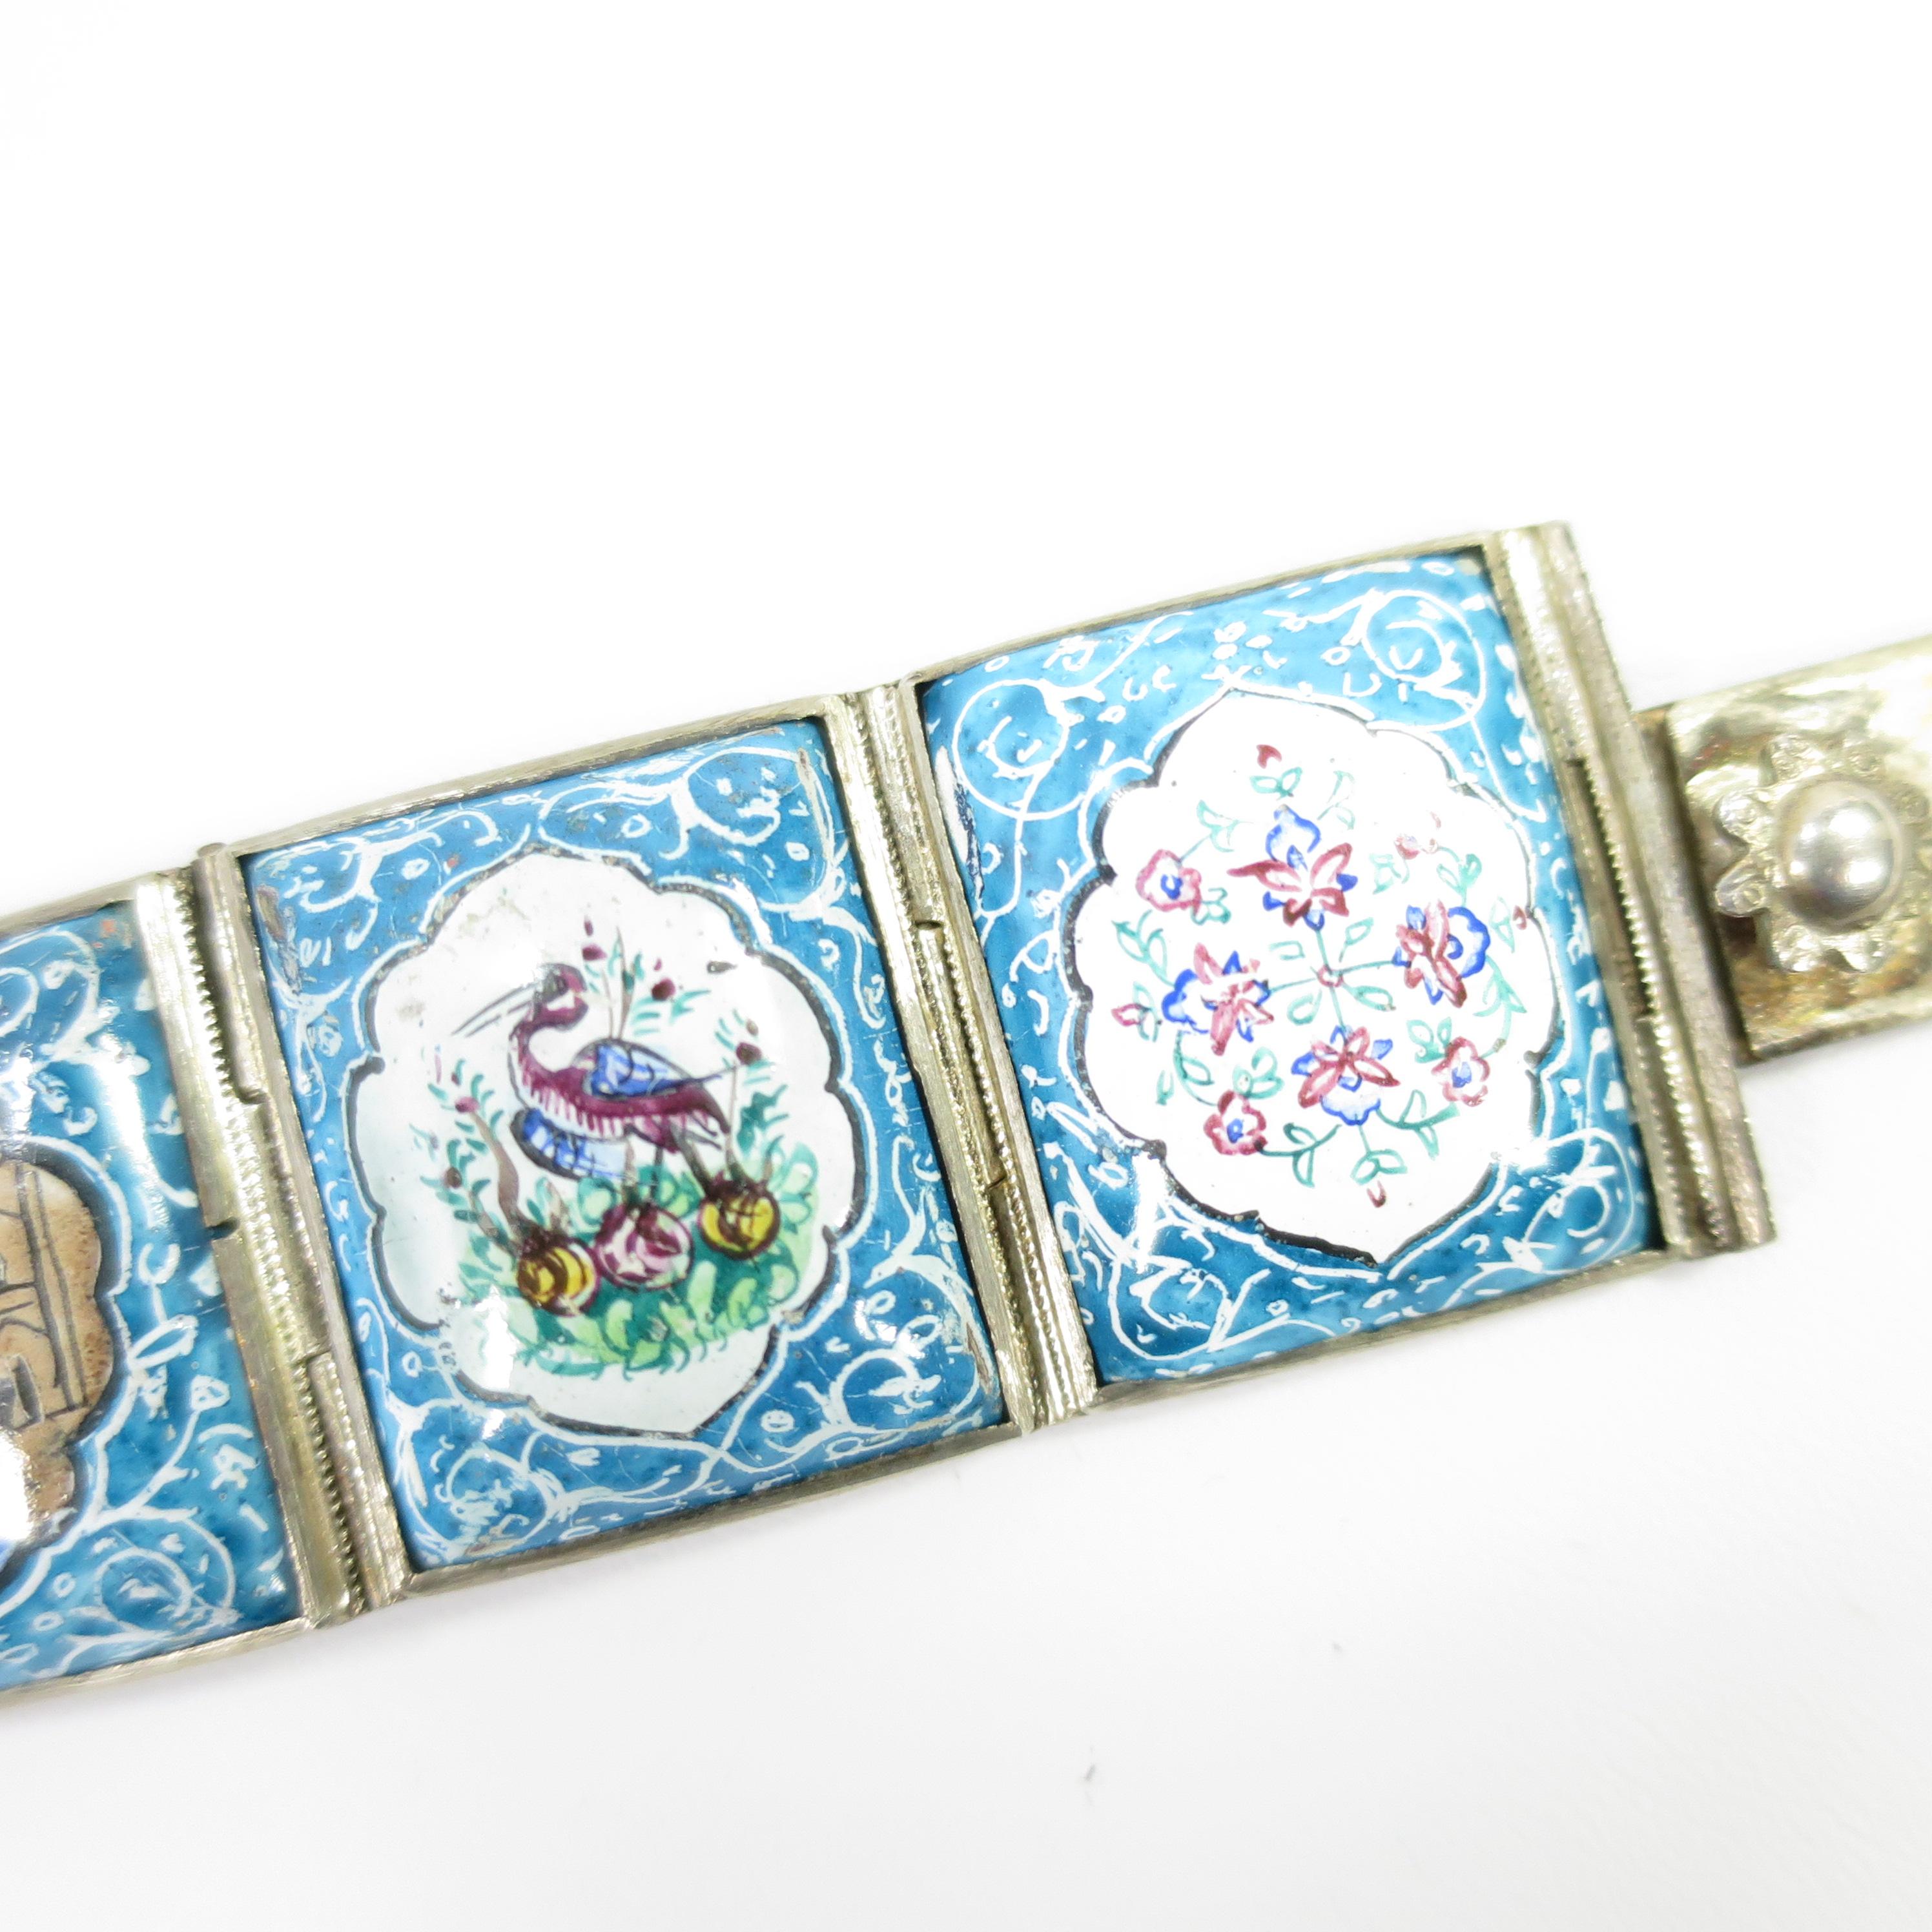 Women's Persian Isfahan Silver Enamel Articulated Panel Bracelet, Artist-Signed 1930s For Sale